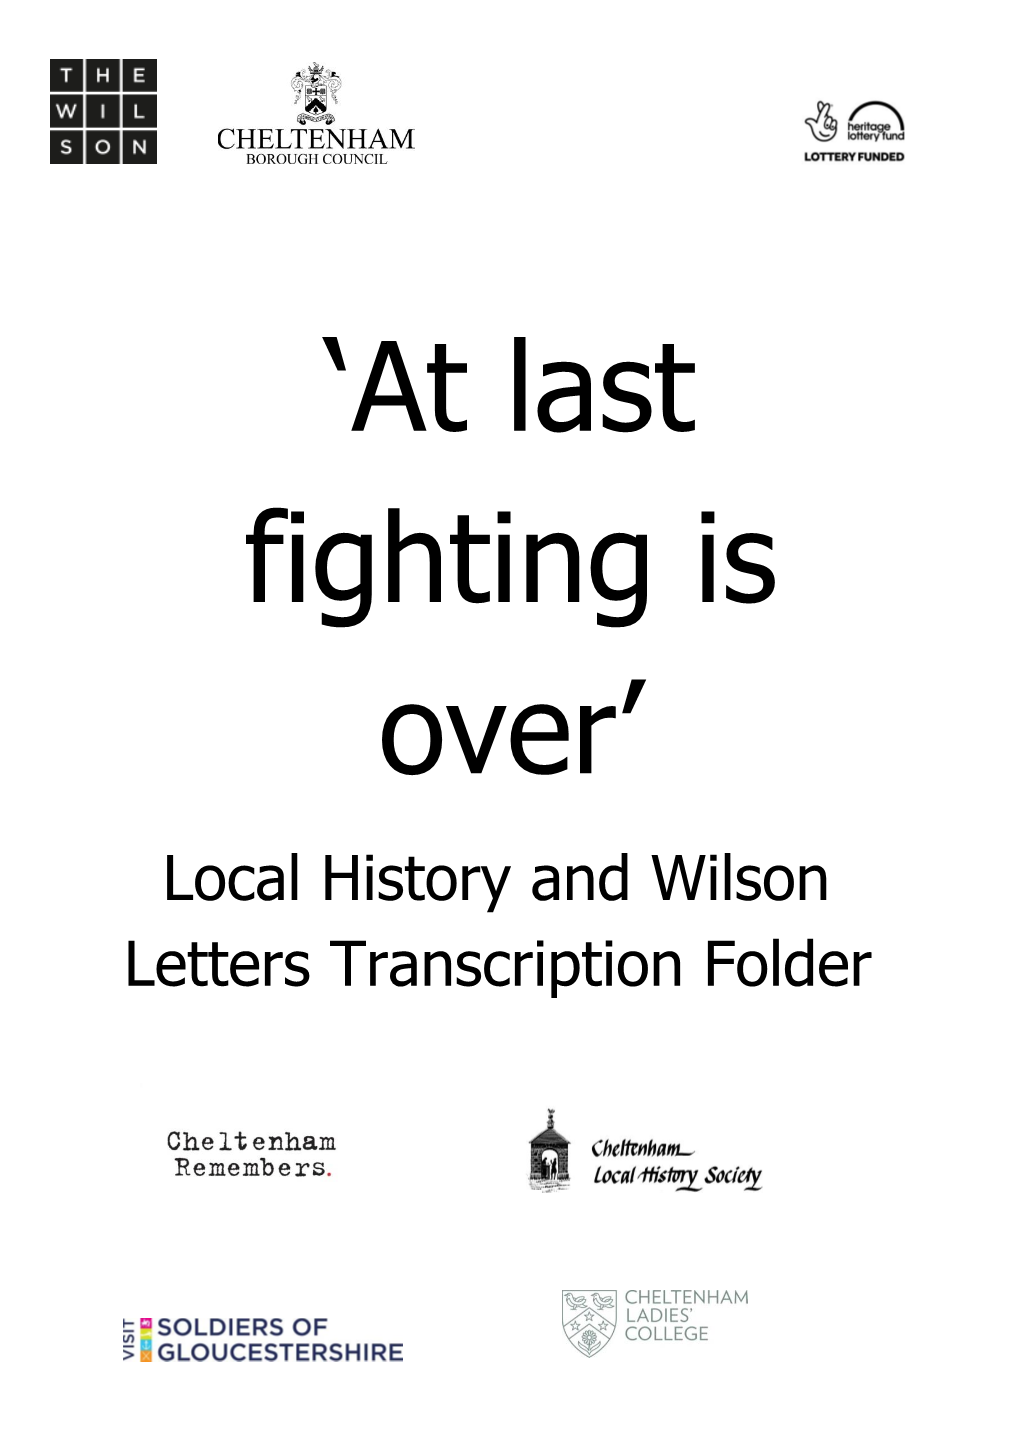 Local History and Wilson Letters Transcription Folder